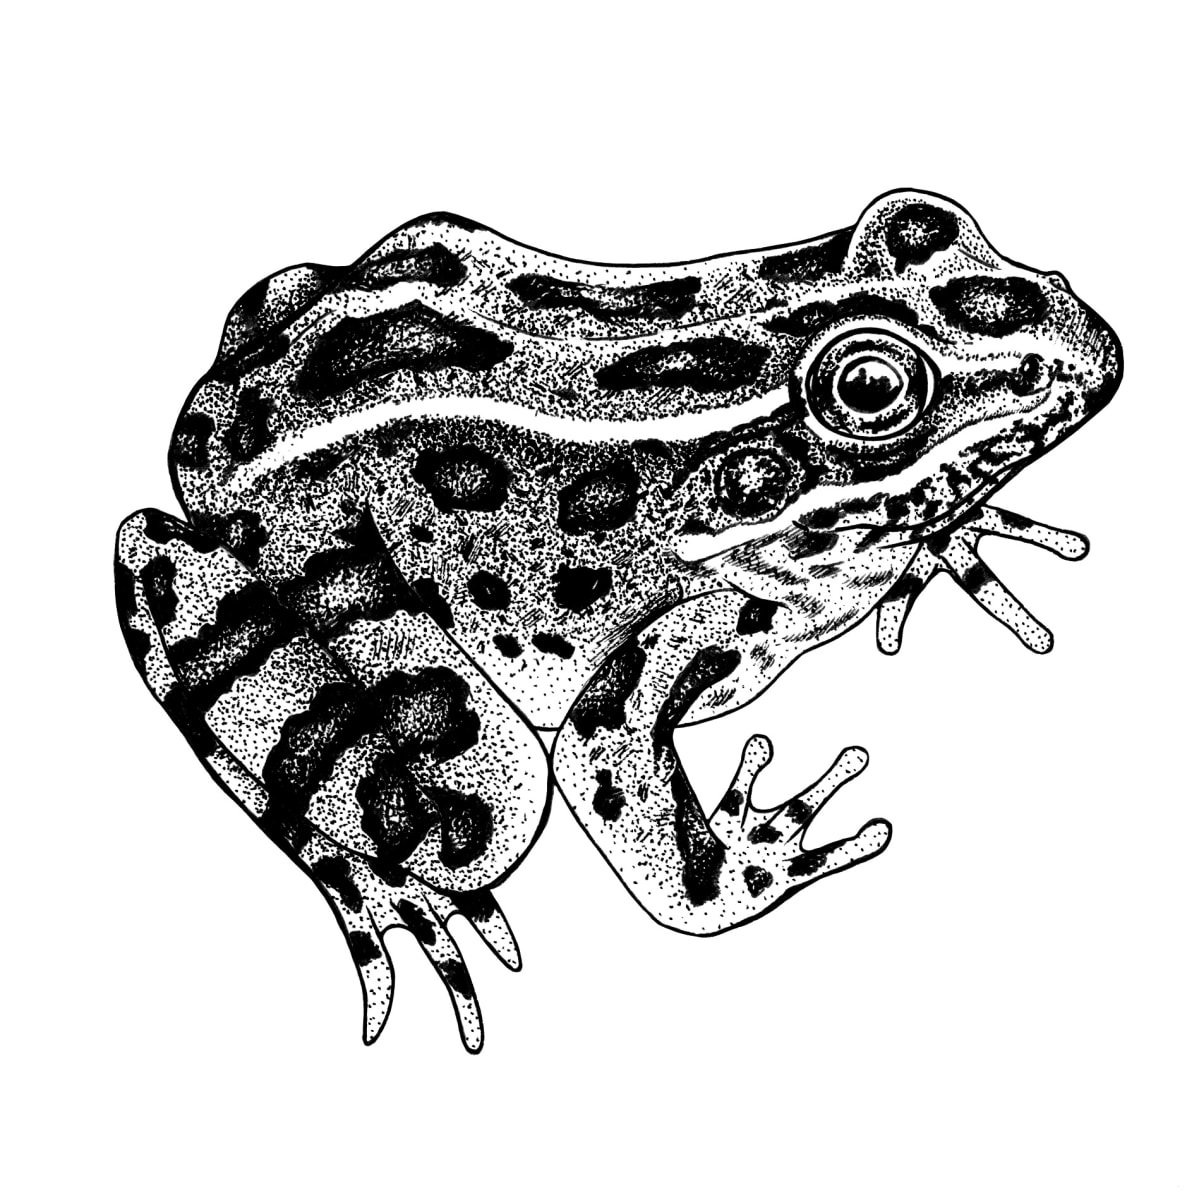 Northern Leopard Frog by Caitlin Rausch 